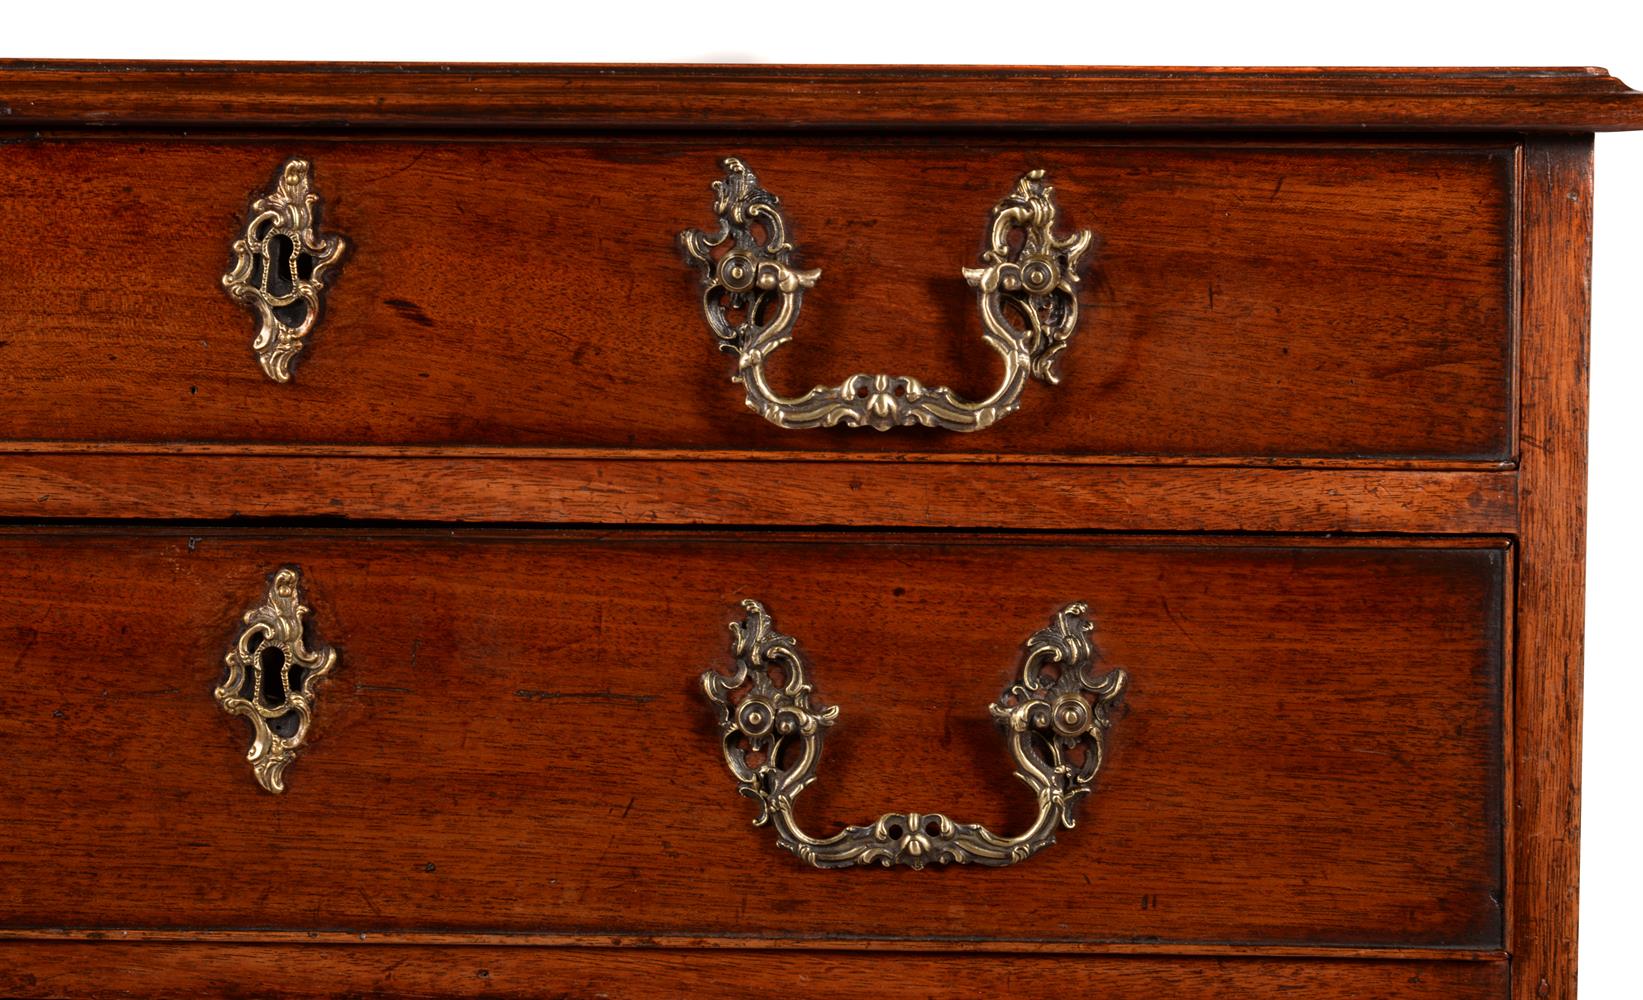 A GEORGE III MAHOGANY CHEST OF DRAWERS, IN THE MANNER OF THOMAS CHIPPENDALE, CIRCA 1770 - Image 4 of 4